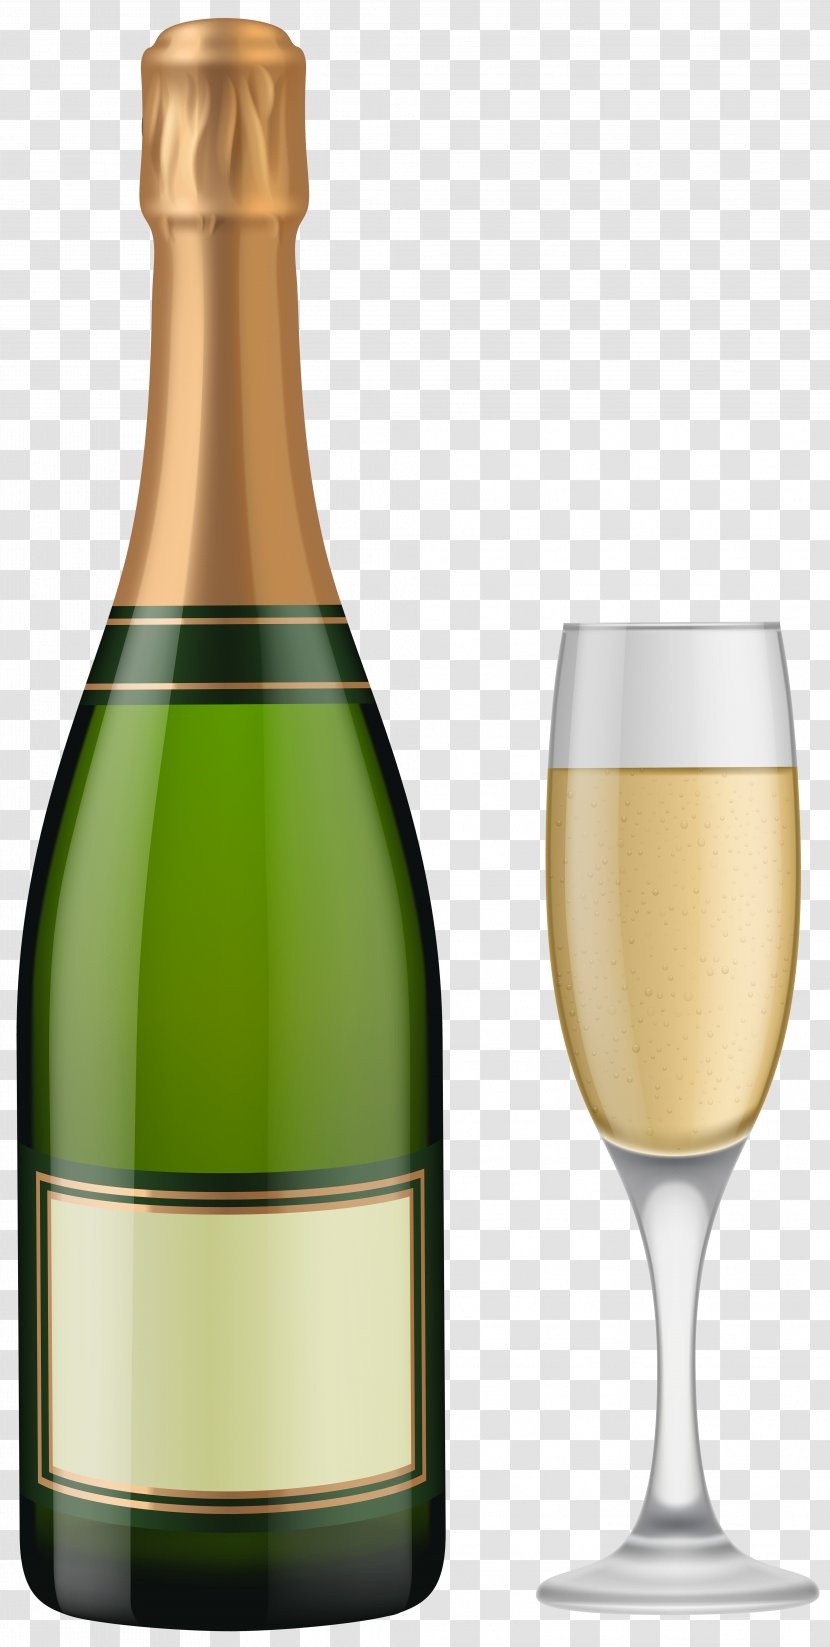 Champagne Glass Sparkling Wine Bottle - Royalty Free - And Clip Art Transparent PNG